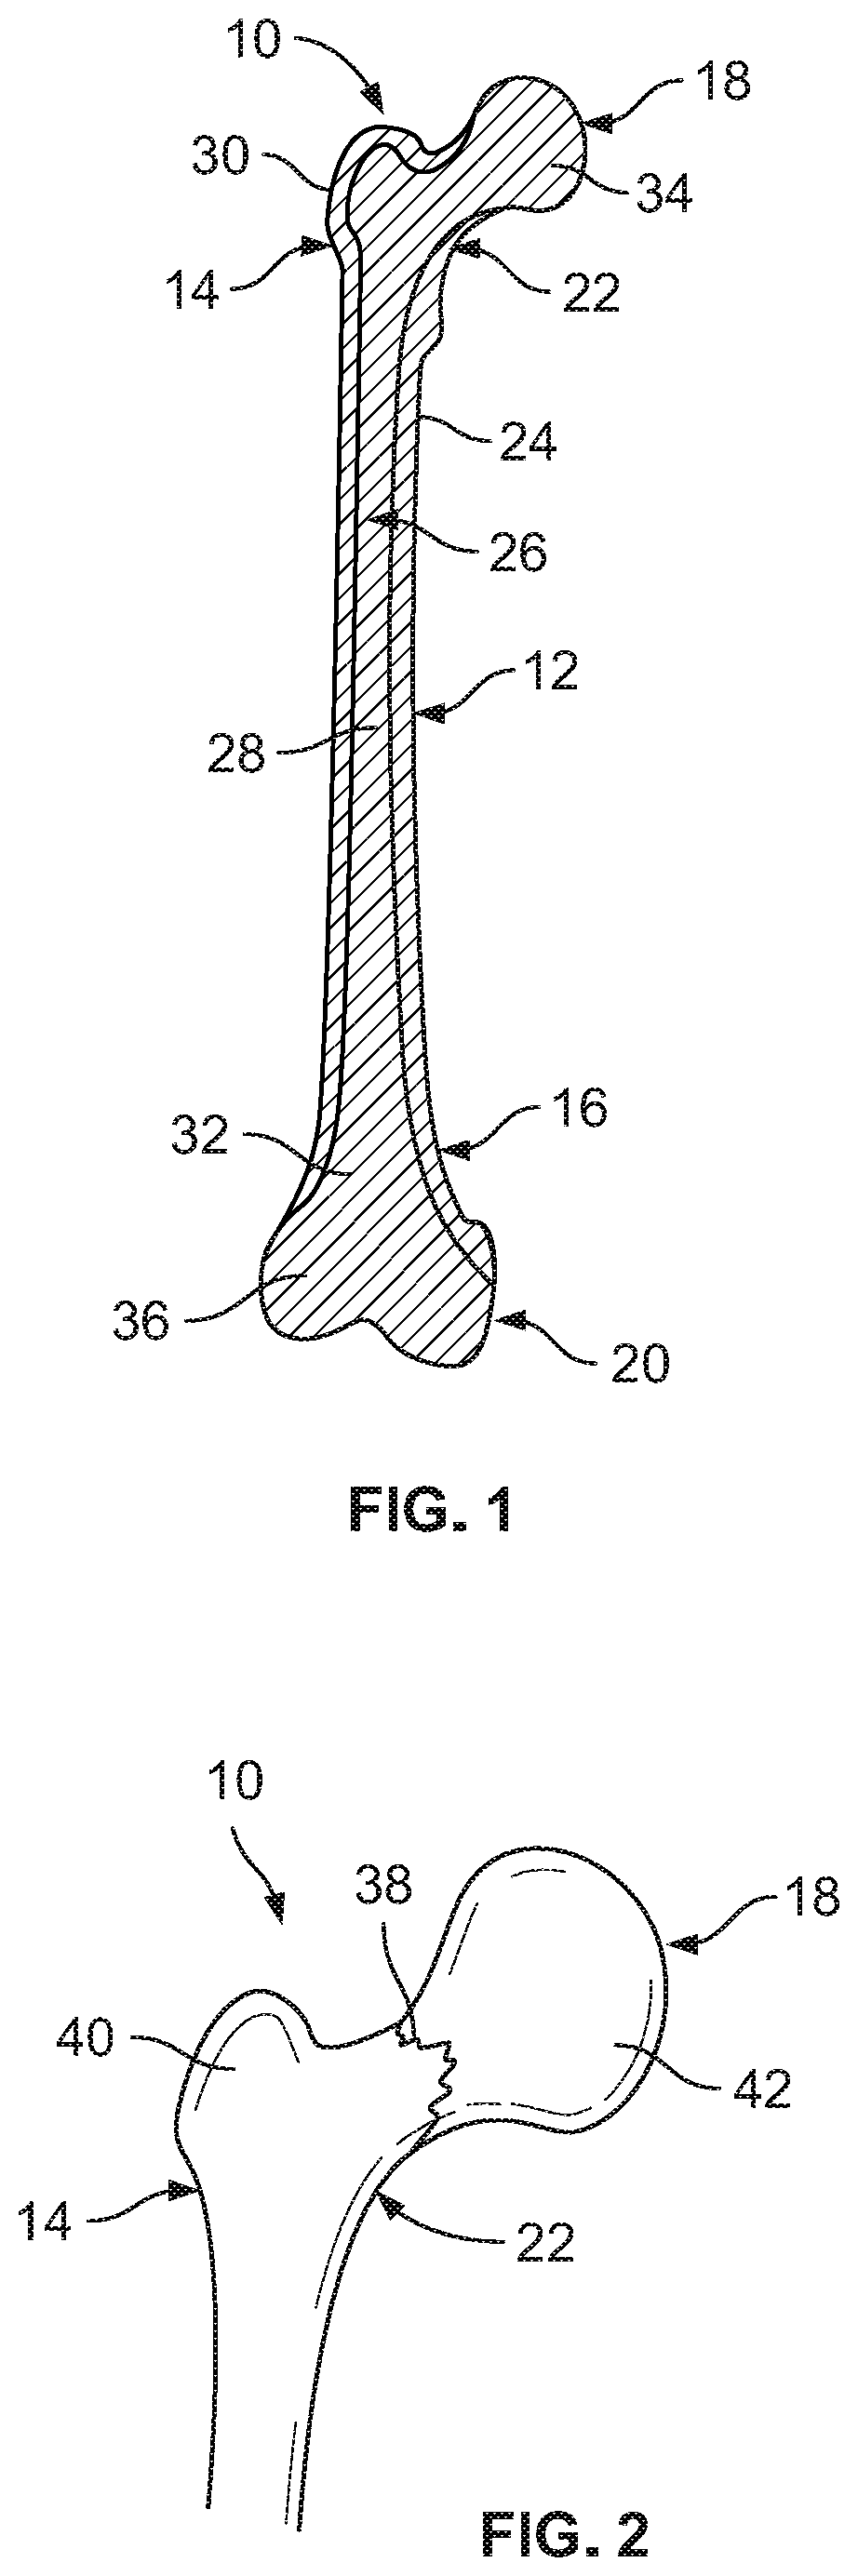 Locking System For Femoral Neck Fracture Fixation